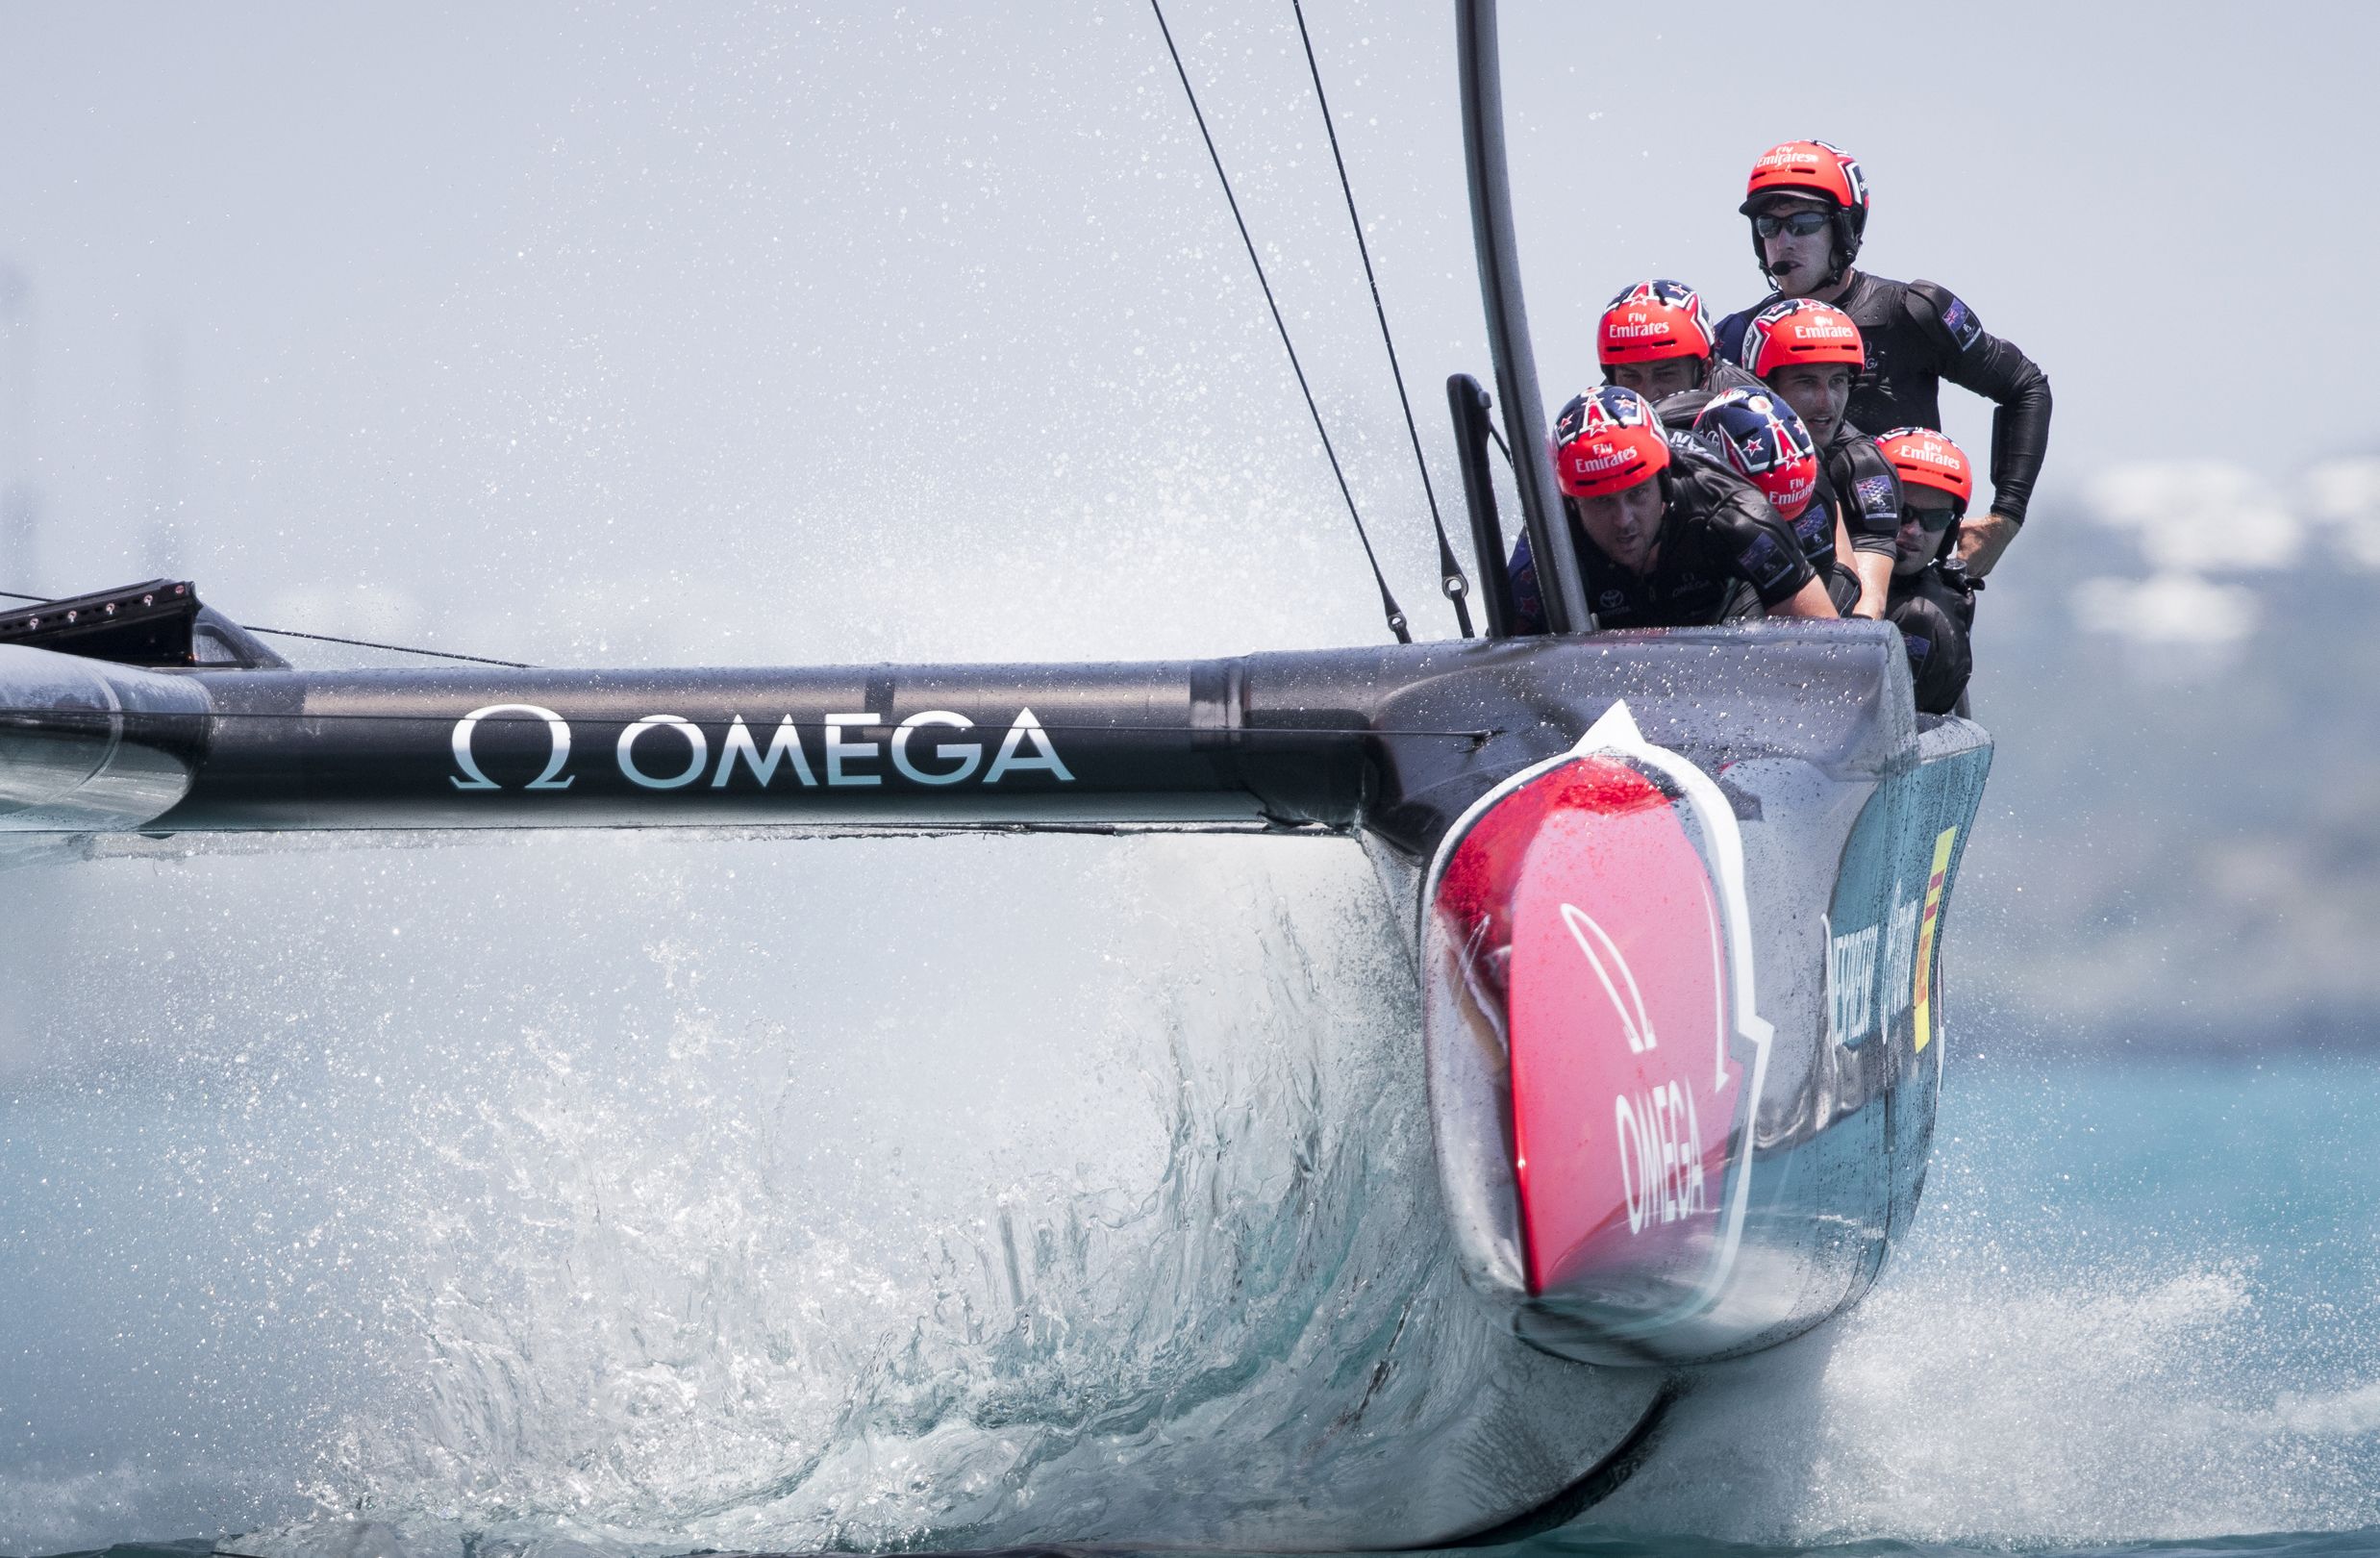 The Trickle-Down Technology of the America's Cup